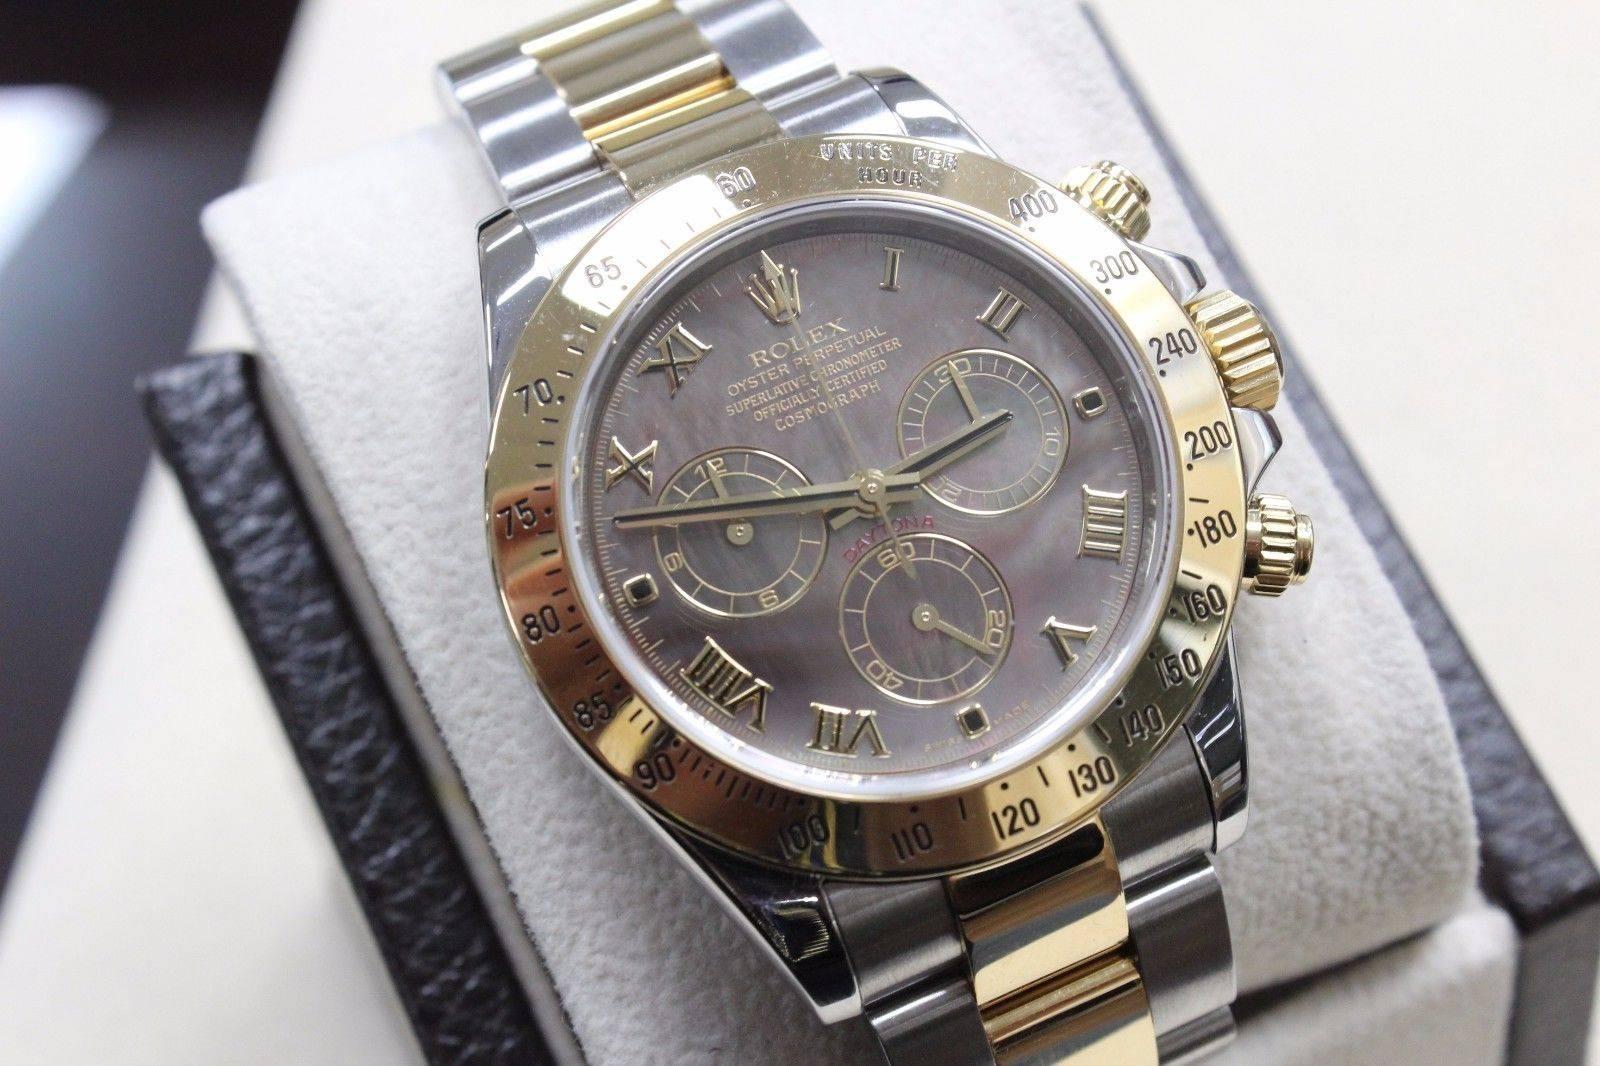 2016 Rolex Daytona 116523 18 Karat Gold and Stainless Black Mother-of-Pearl Dial 2